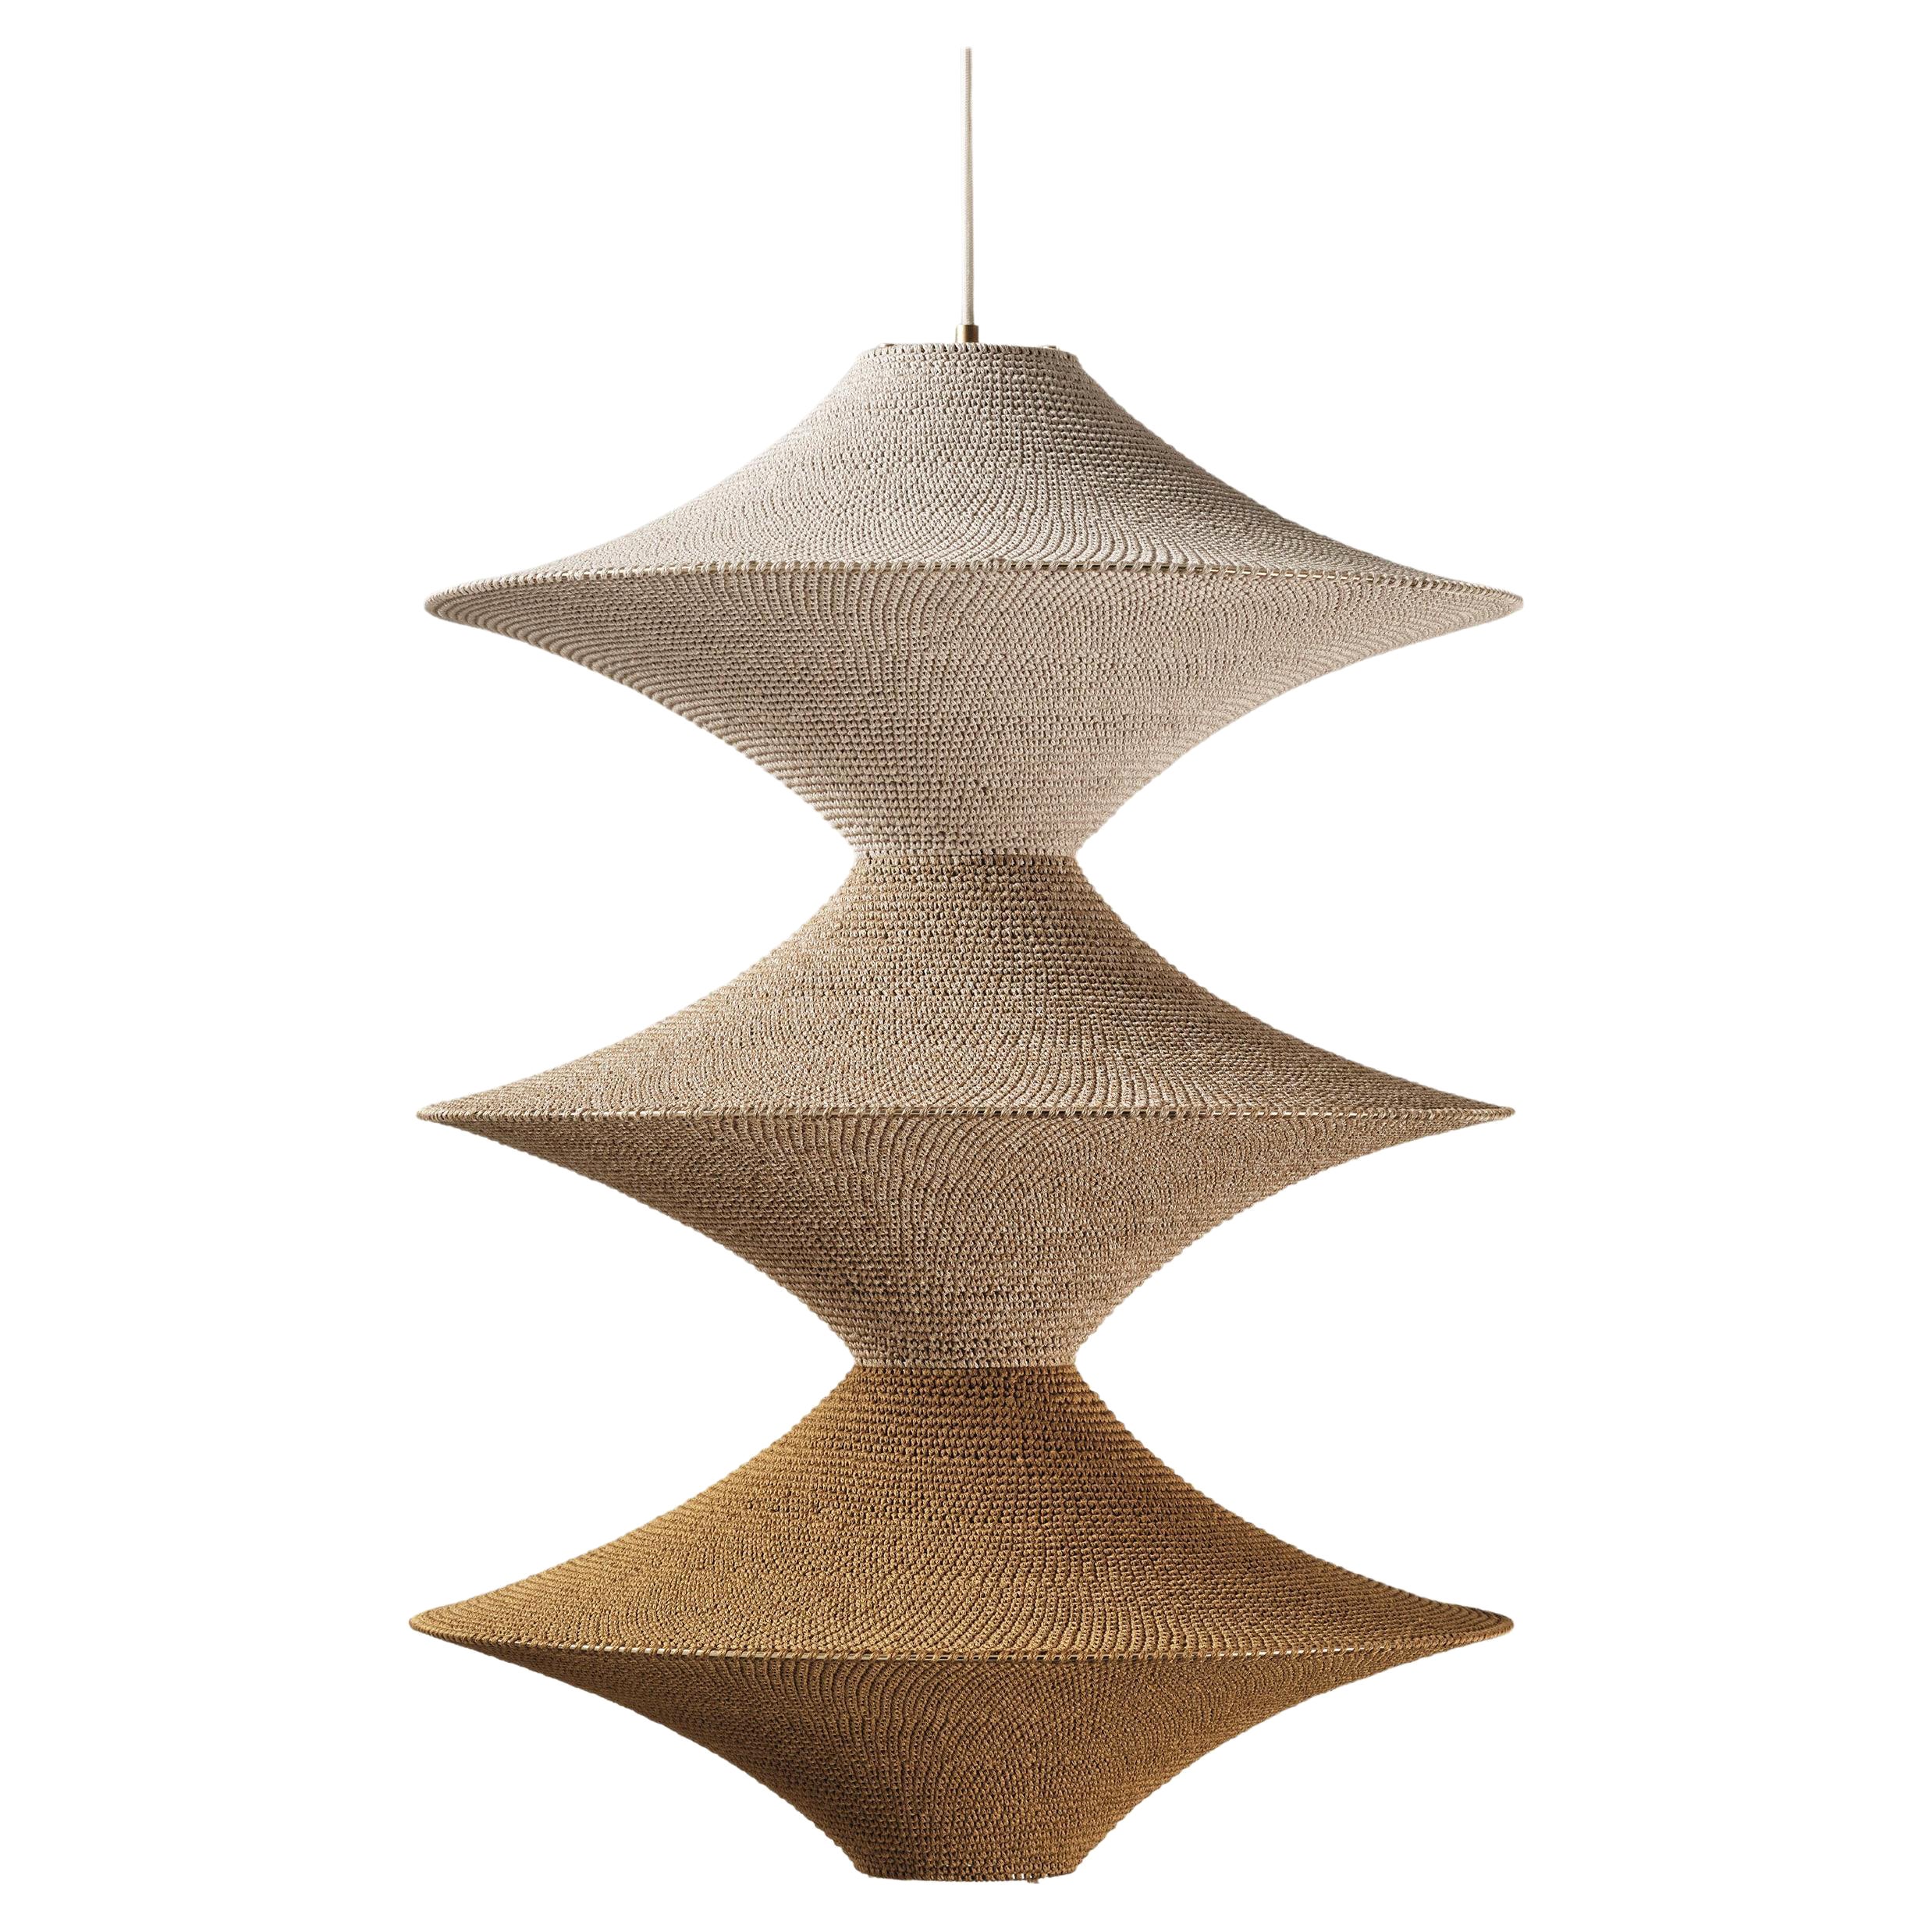 BAMBOO SOLITAIRE 03 Pendant Light Ø50cm/19.7in, Hand Crocheted in Bamboo Paper